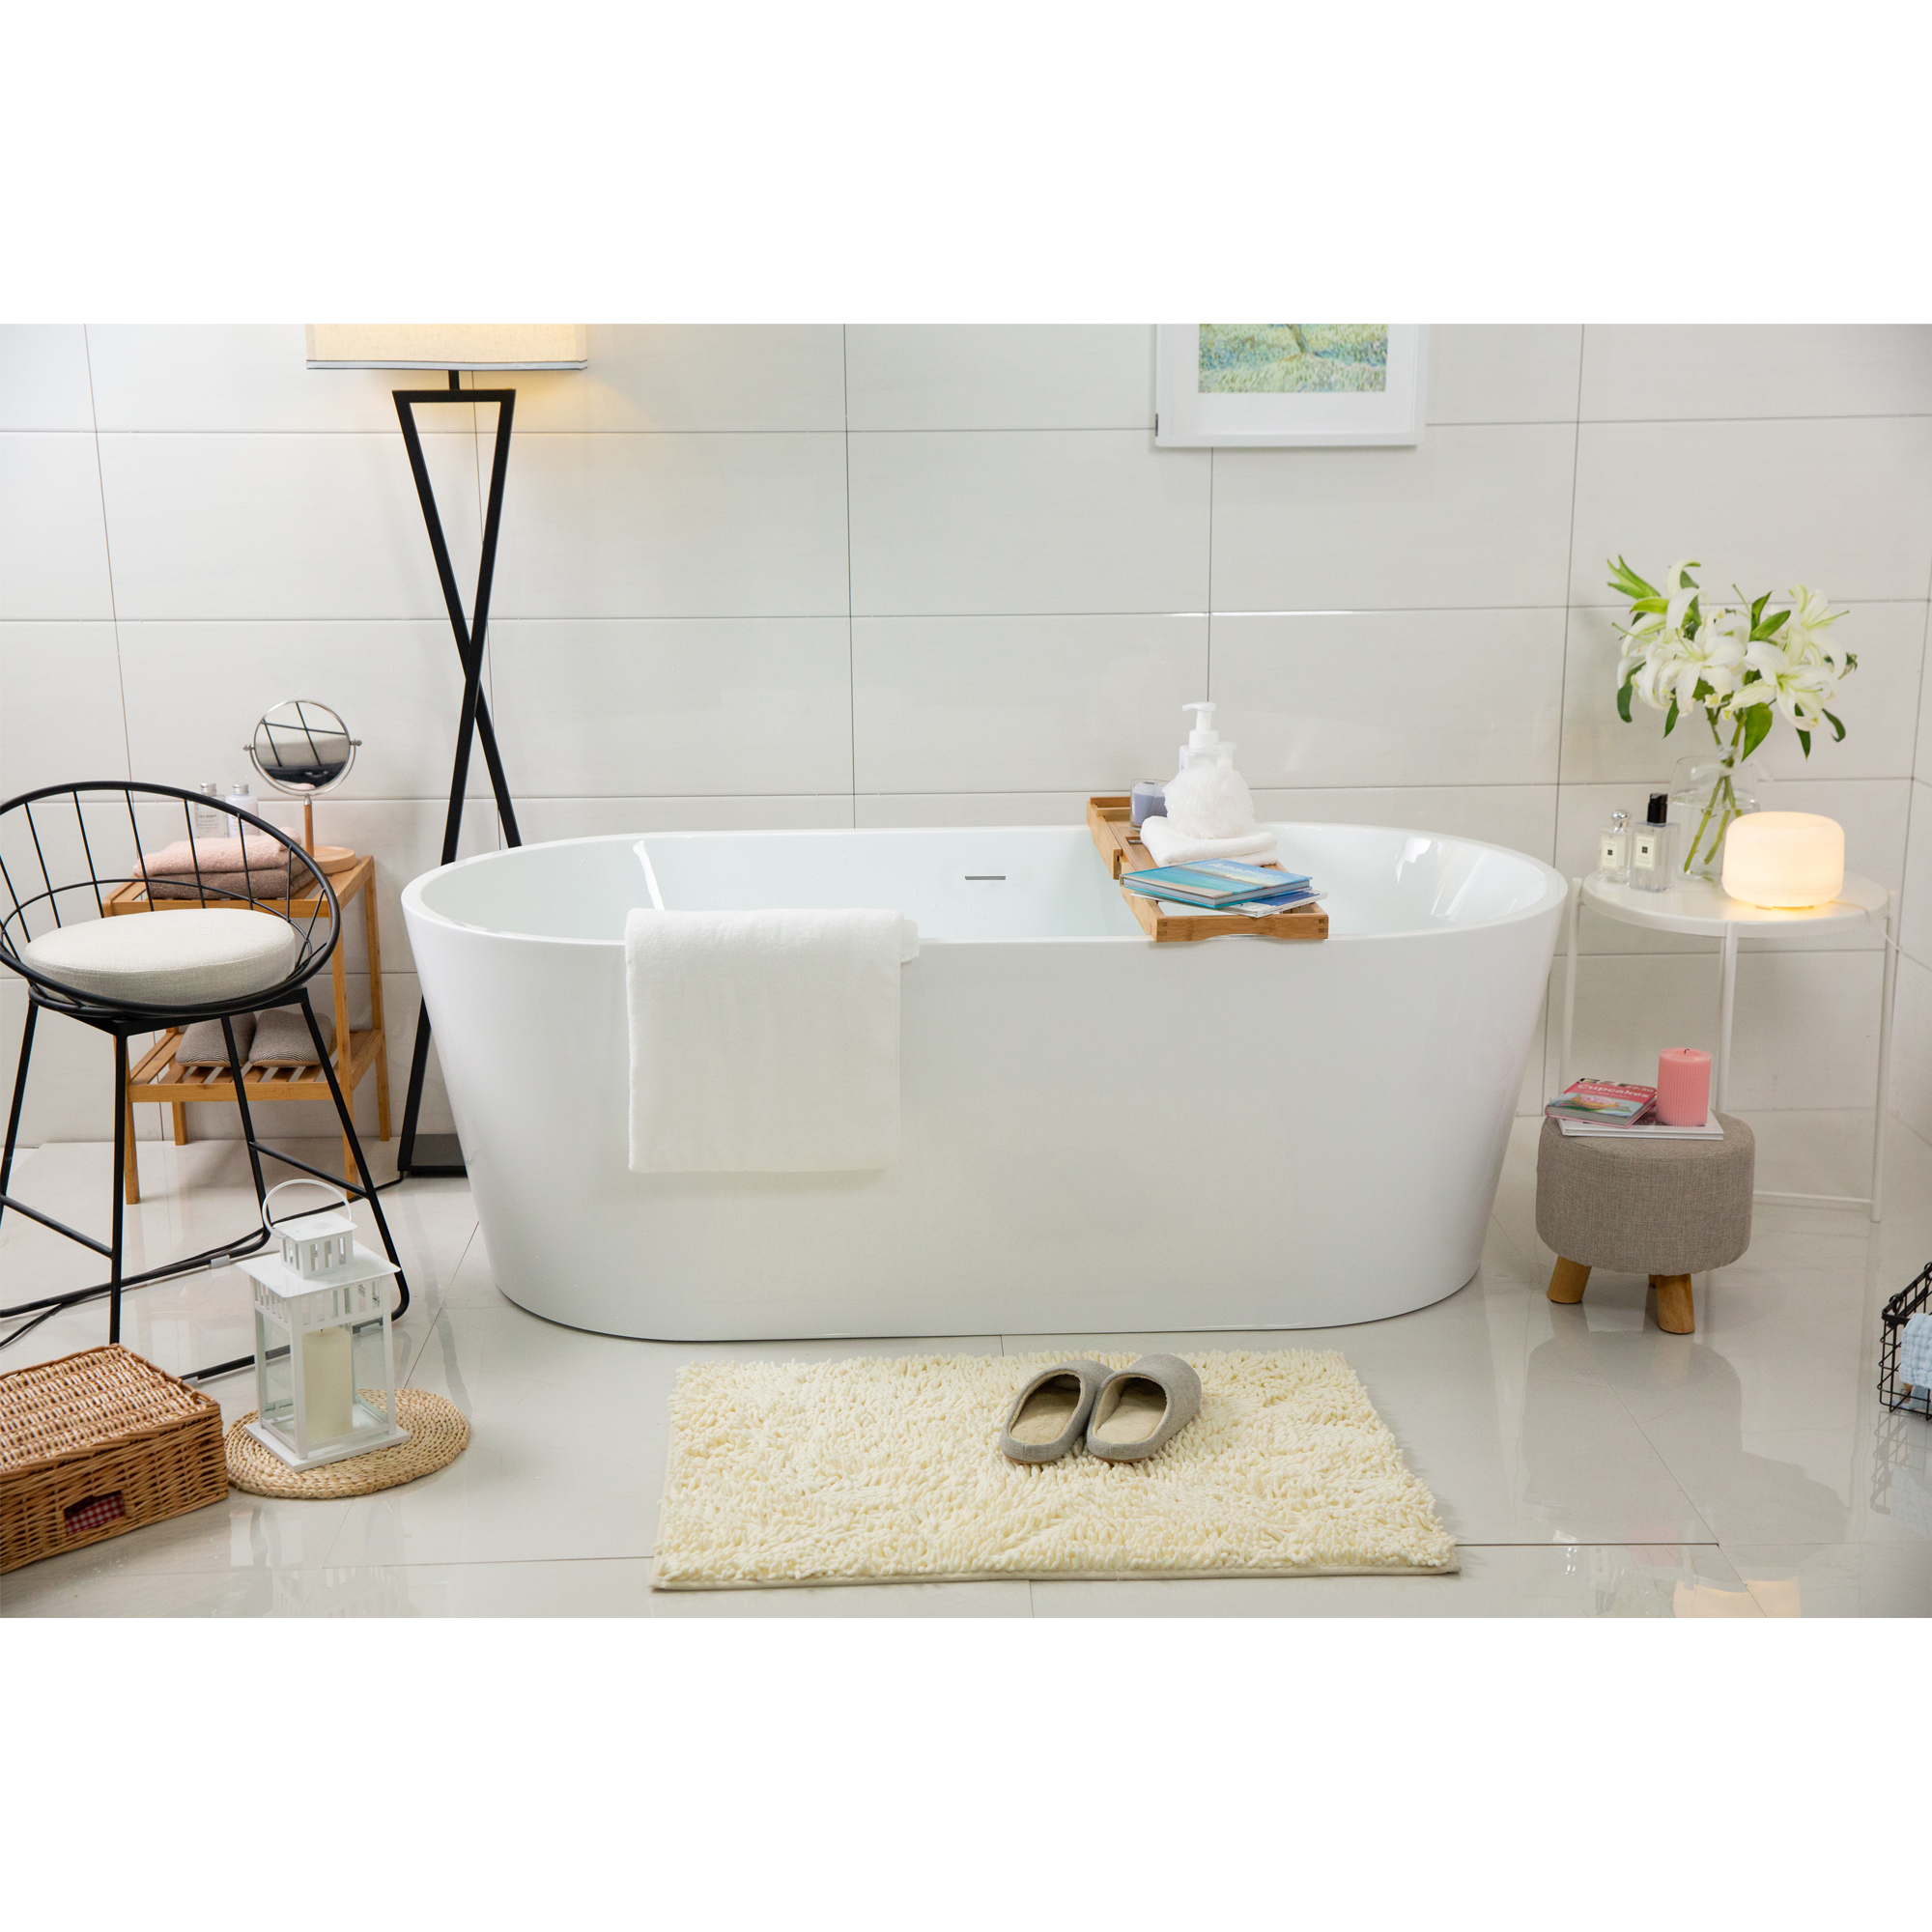 Polished Chrome Drain and Overflow 67 Acrylic Freestanding Soaking Bathtub Glossy White PULSE Showerspas PT-1003-CH